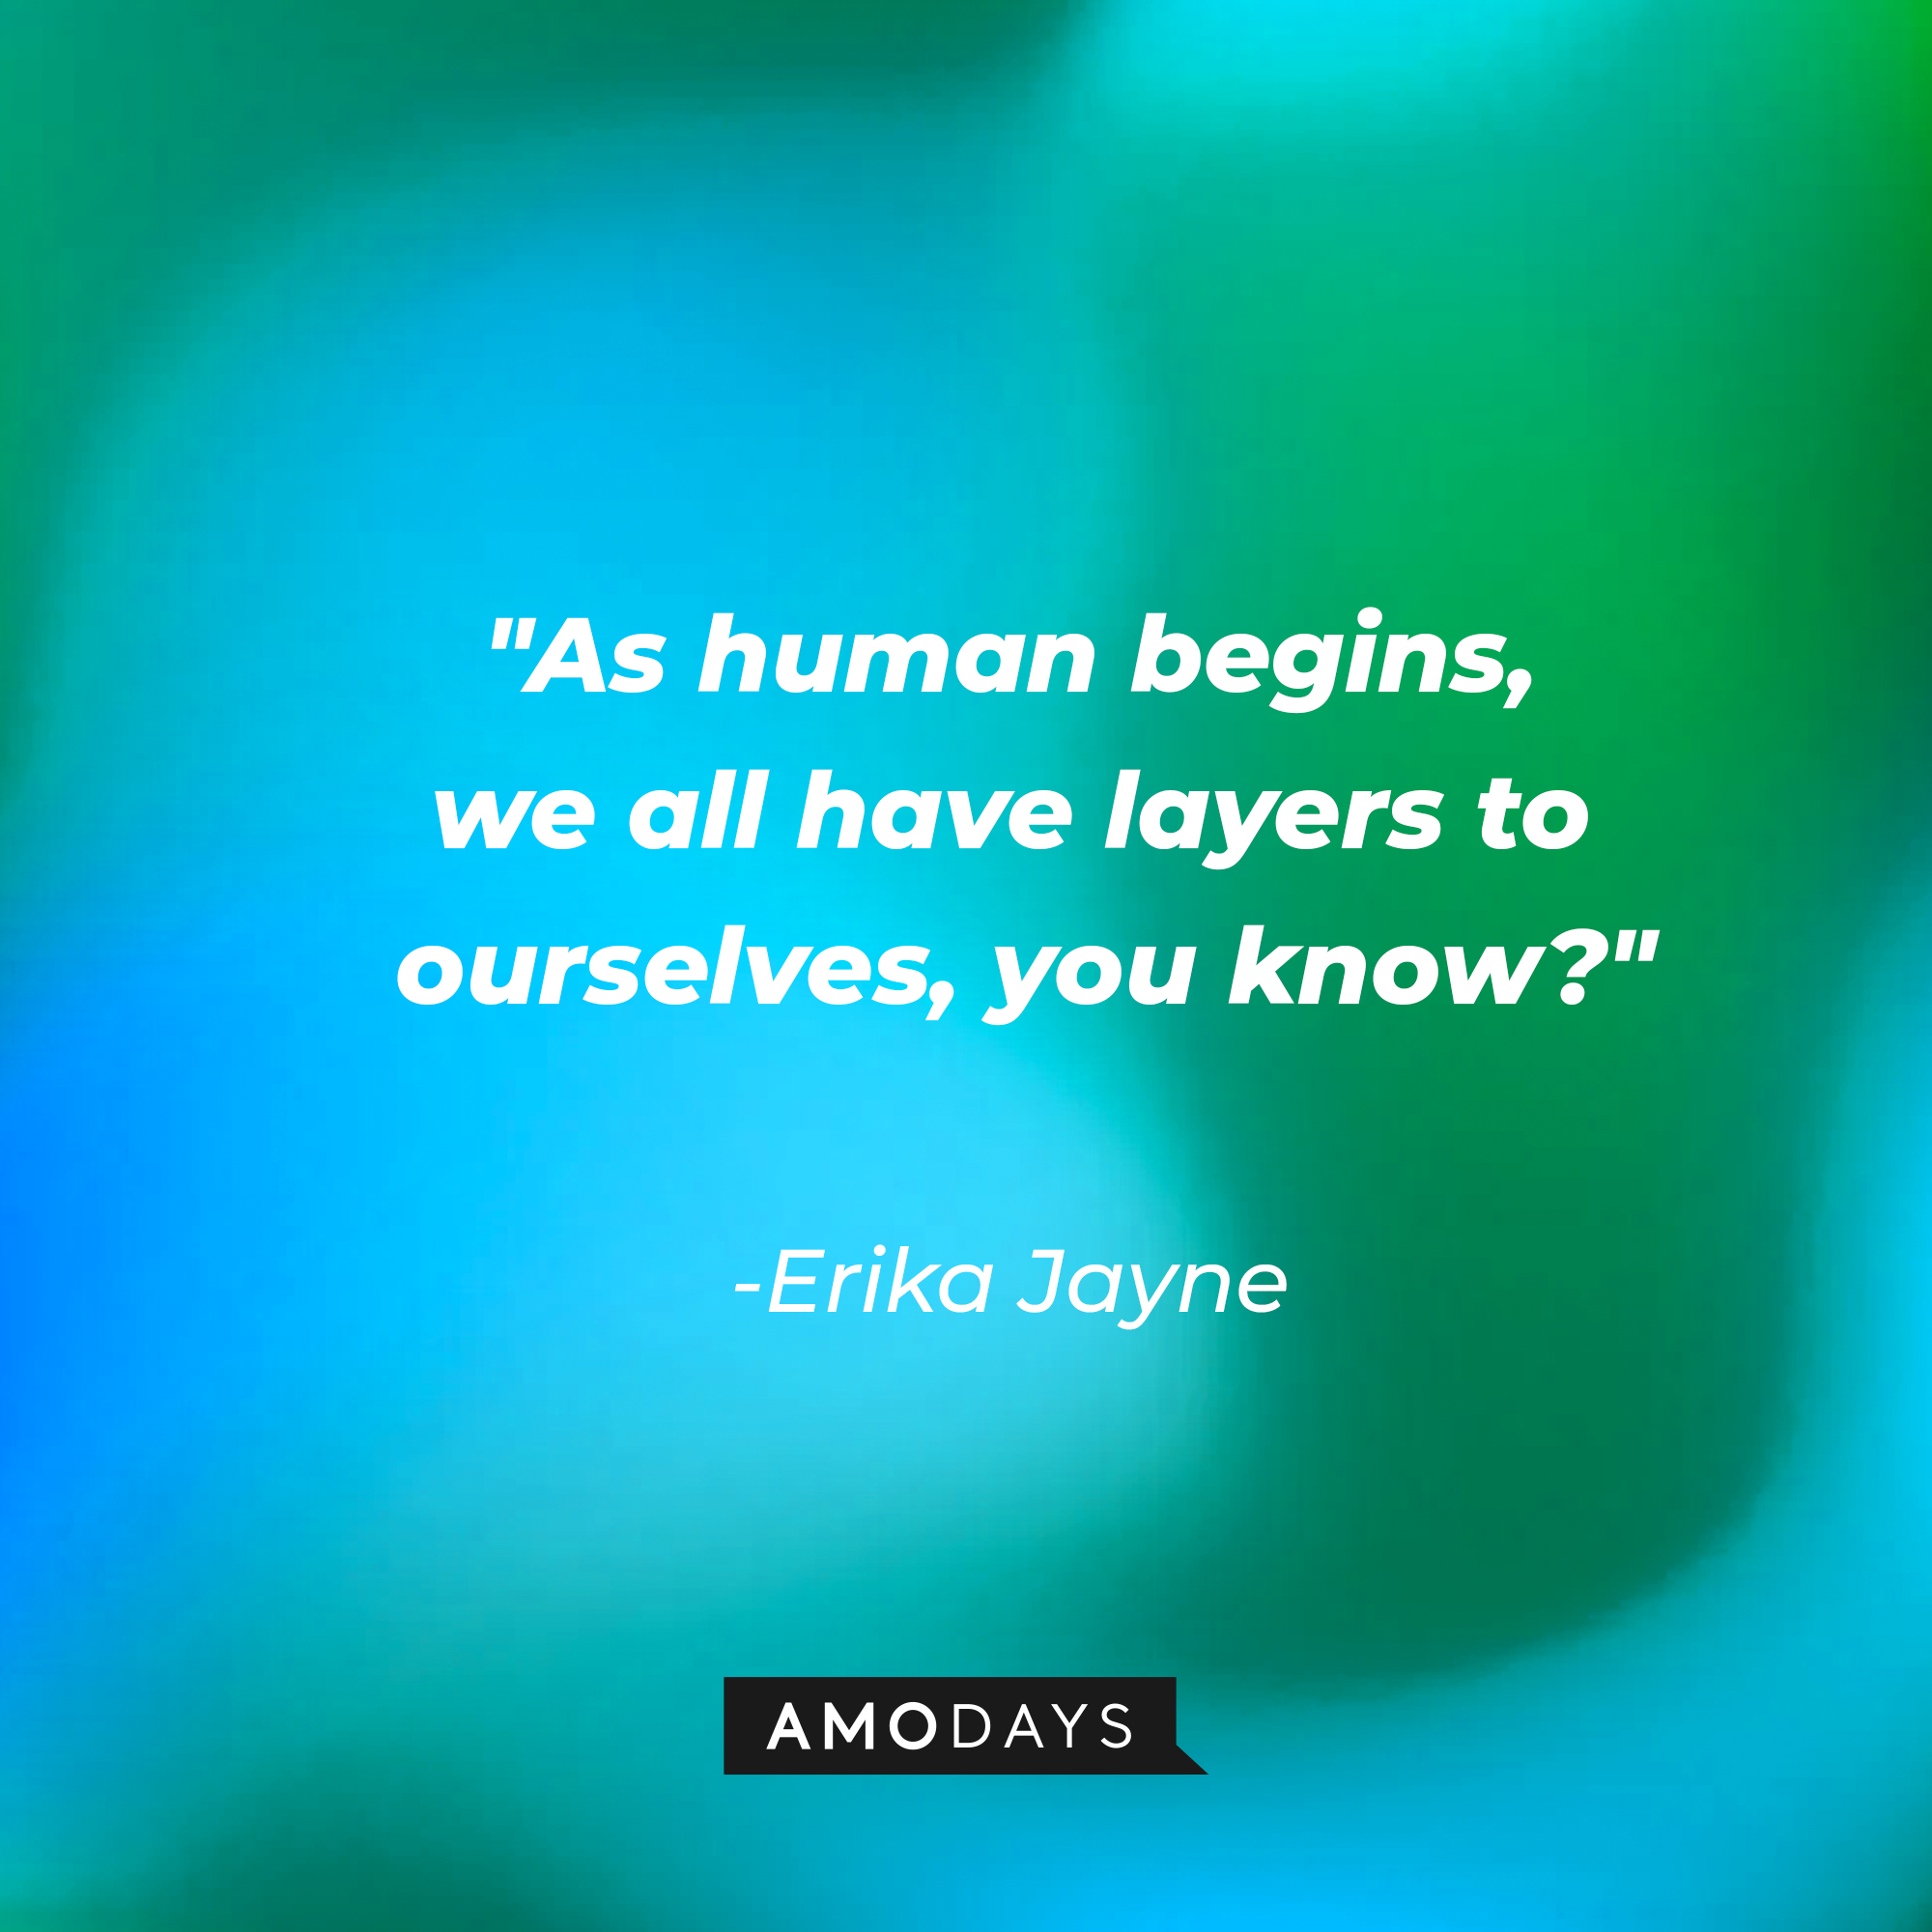 Erika Jayne’s quote: "As human begins, we all have layers to ourselves, you know?" | Image: Amodays